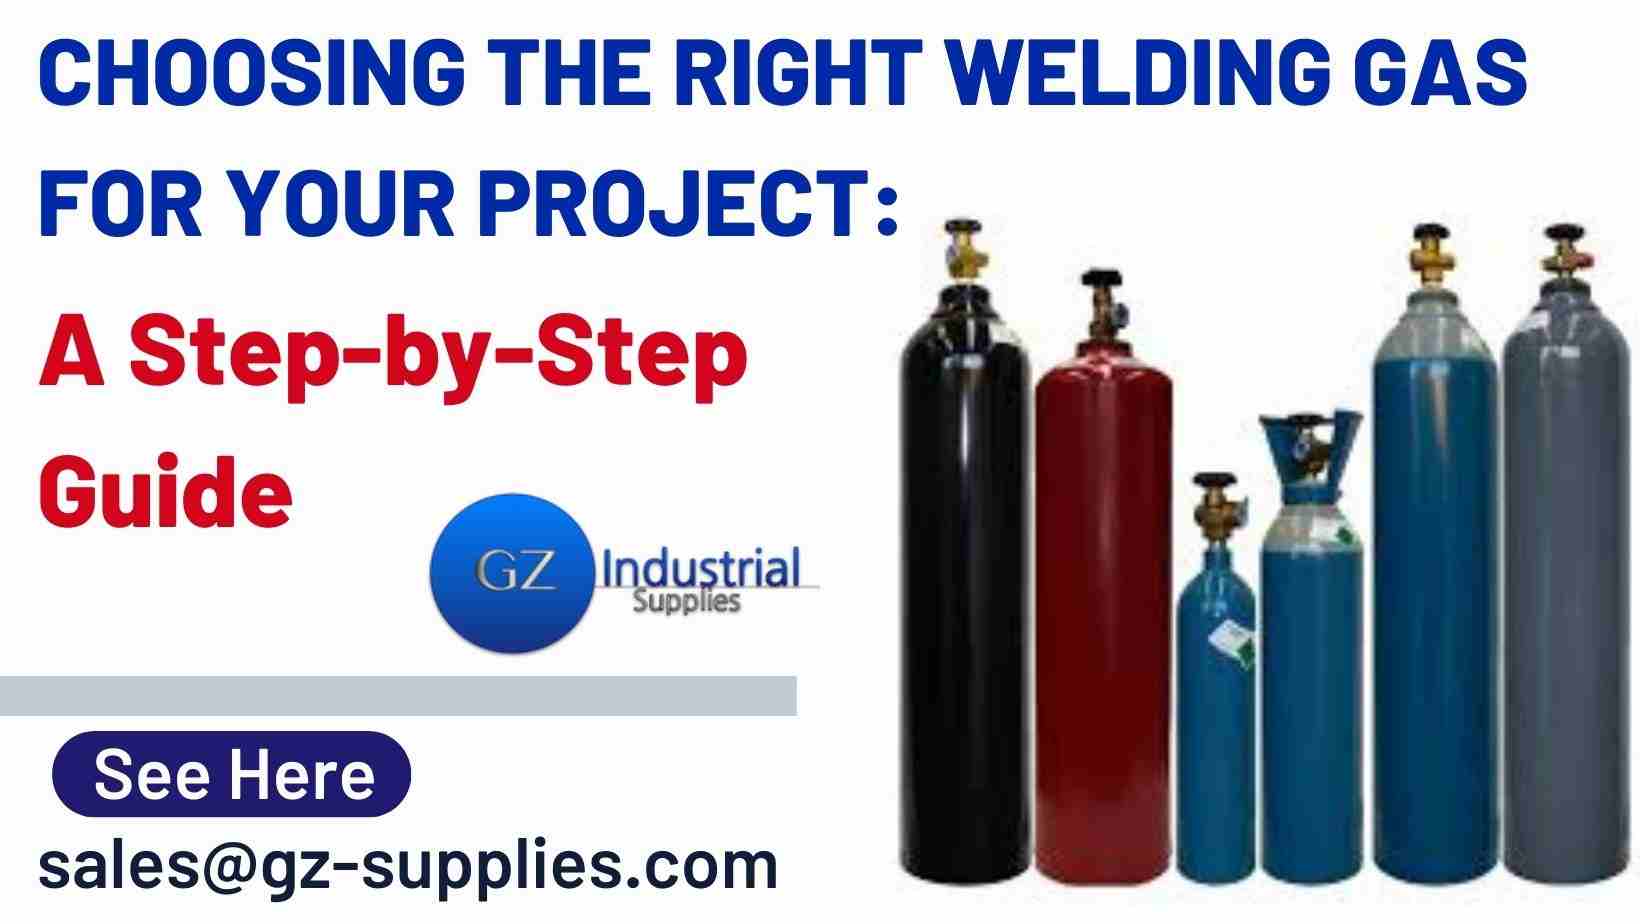 Choosing the Right Welding Gas for Your Project: A Step-by-Step